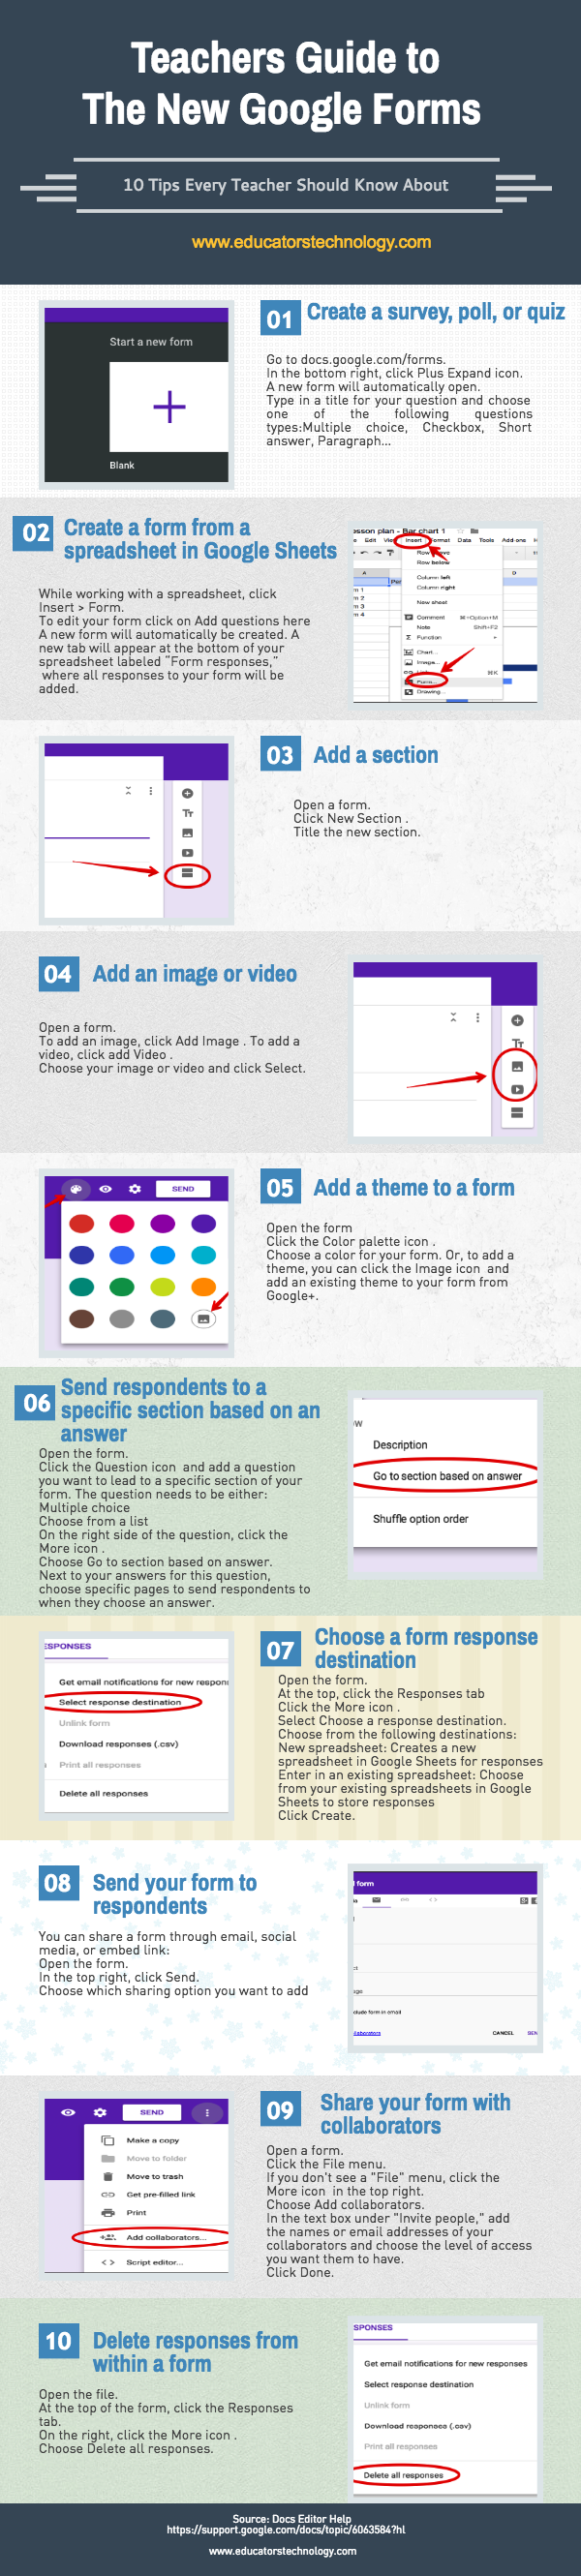 Key Google Forms Tips and Tricks for Teachers